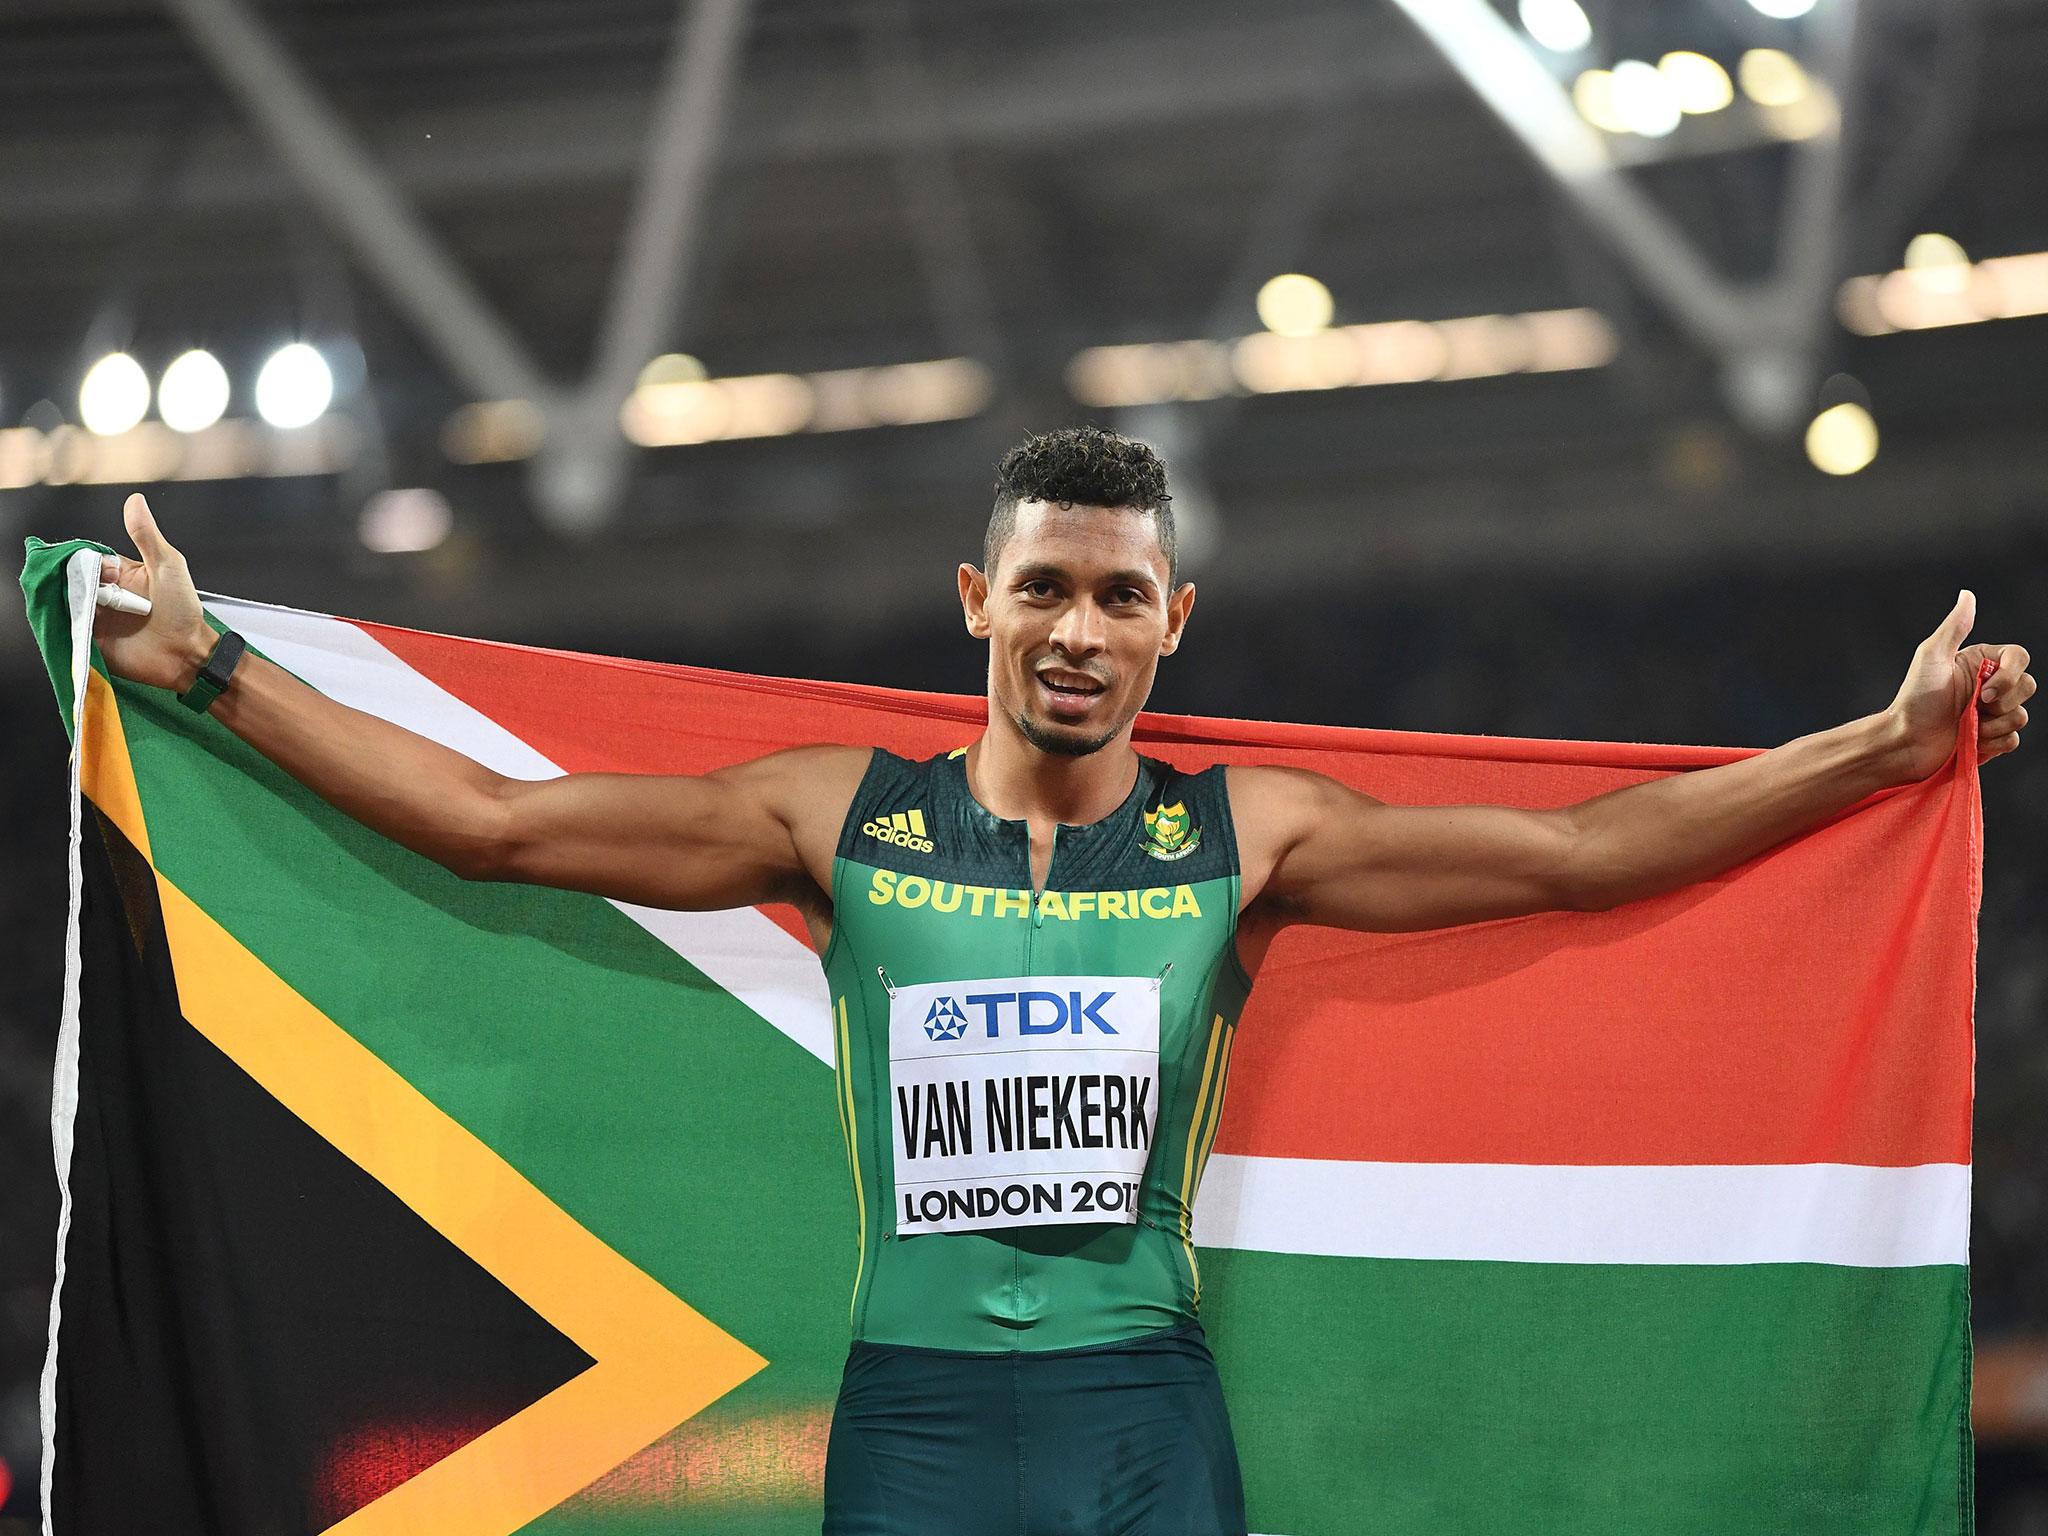 The South African celebrates his victory after running to gold in 43.98 seconds